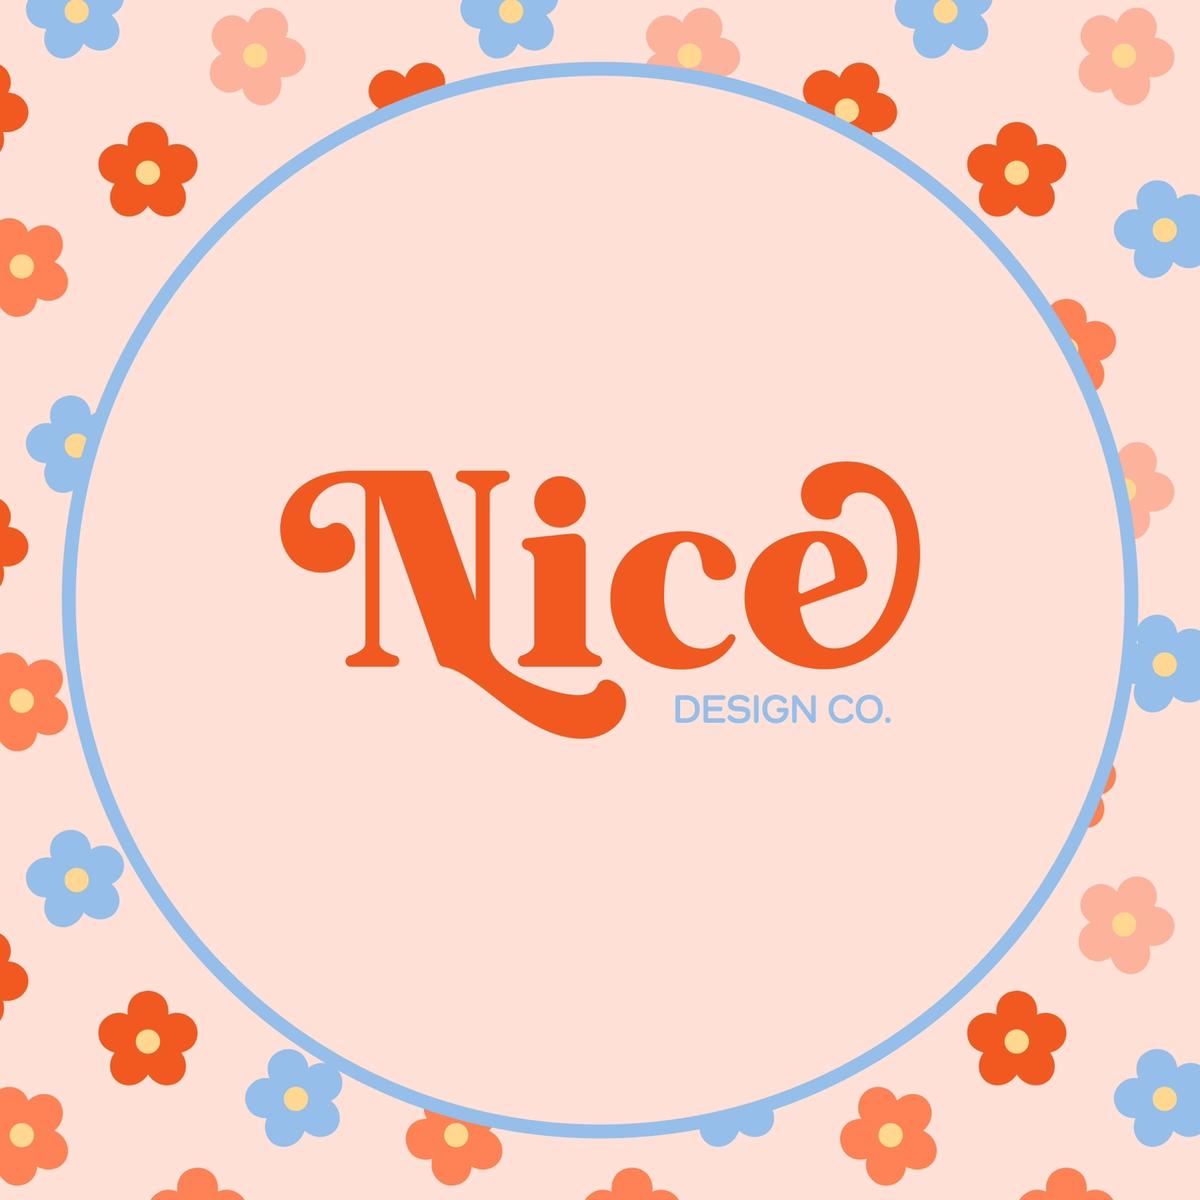 NiceDesignCo's images